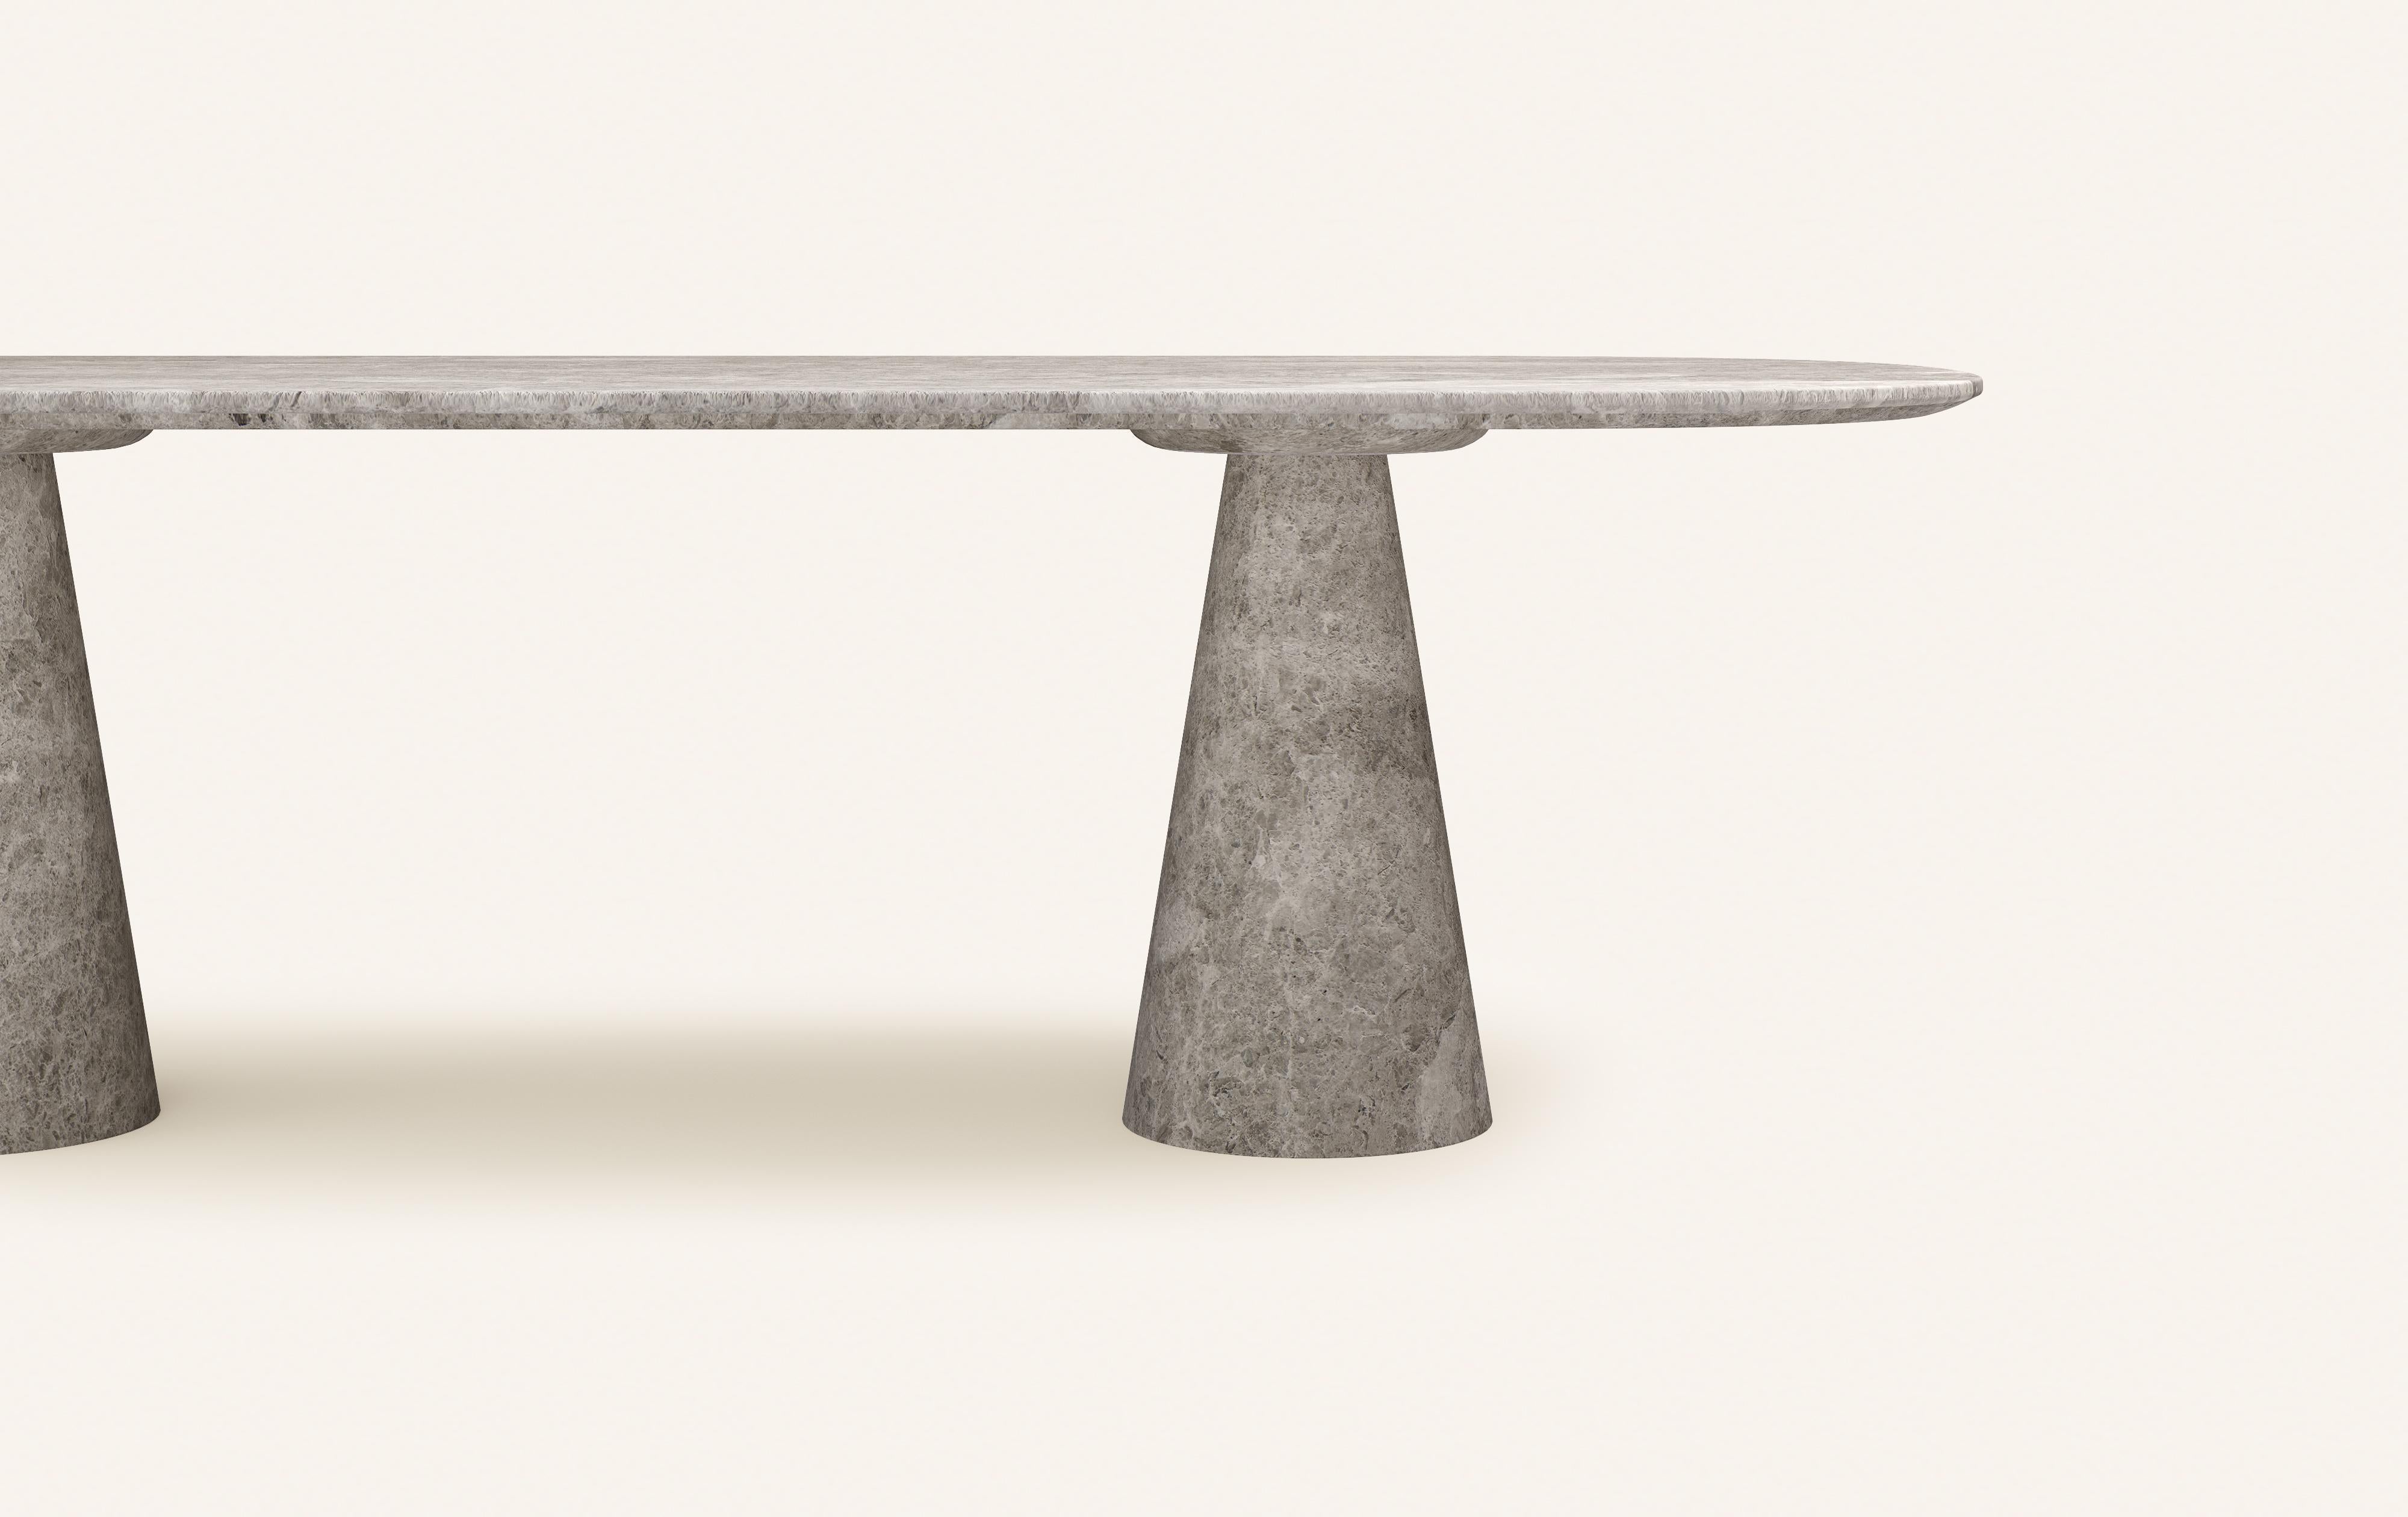 American FORM(LA) Cono Oval Dining Table 96”L x 42”W x 30”H Tundra Gray Marble For Sale